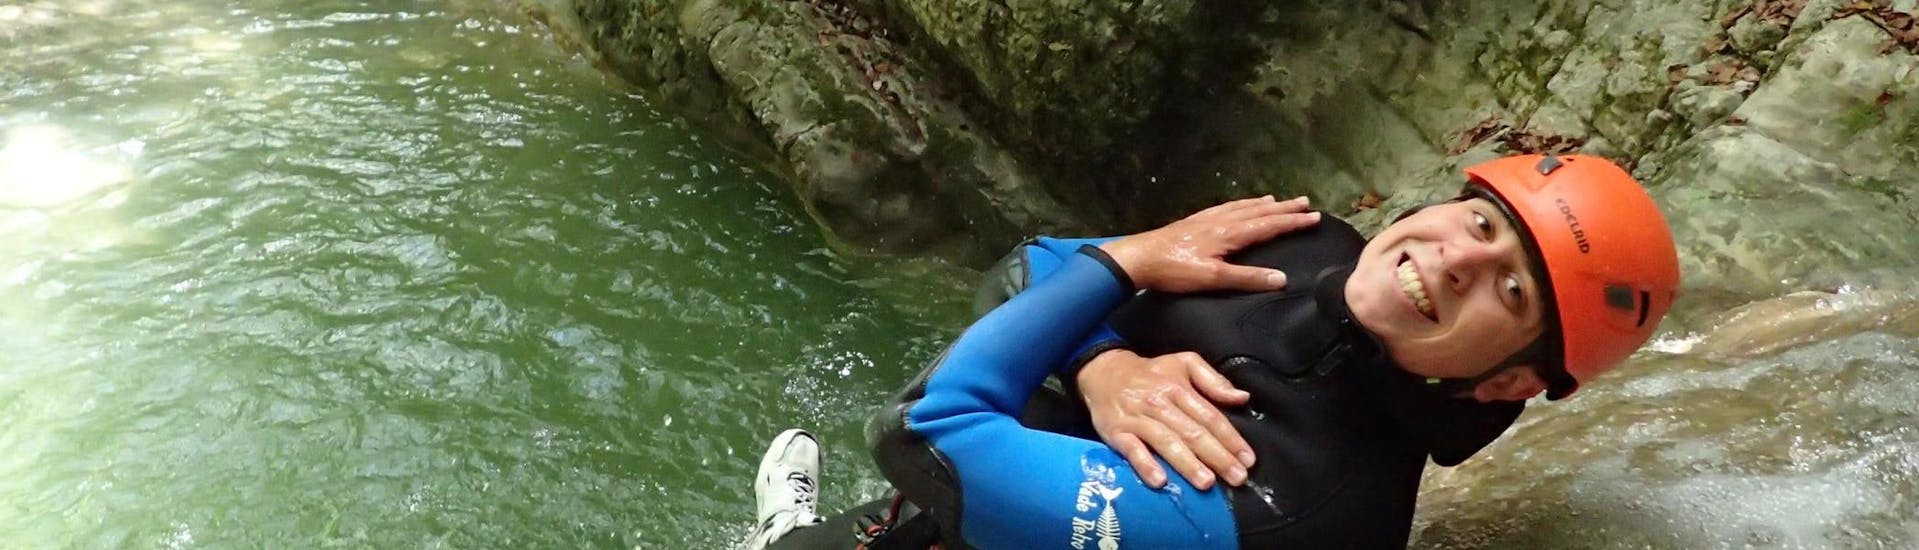 One of the participants of the Canyoning "Discovery" - Canyon d'Angon tour by Térreo Canyoning is sliding down a natural water slide.